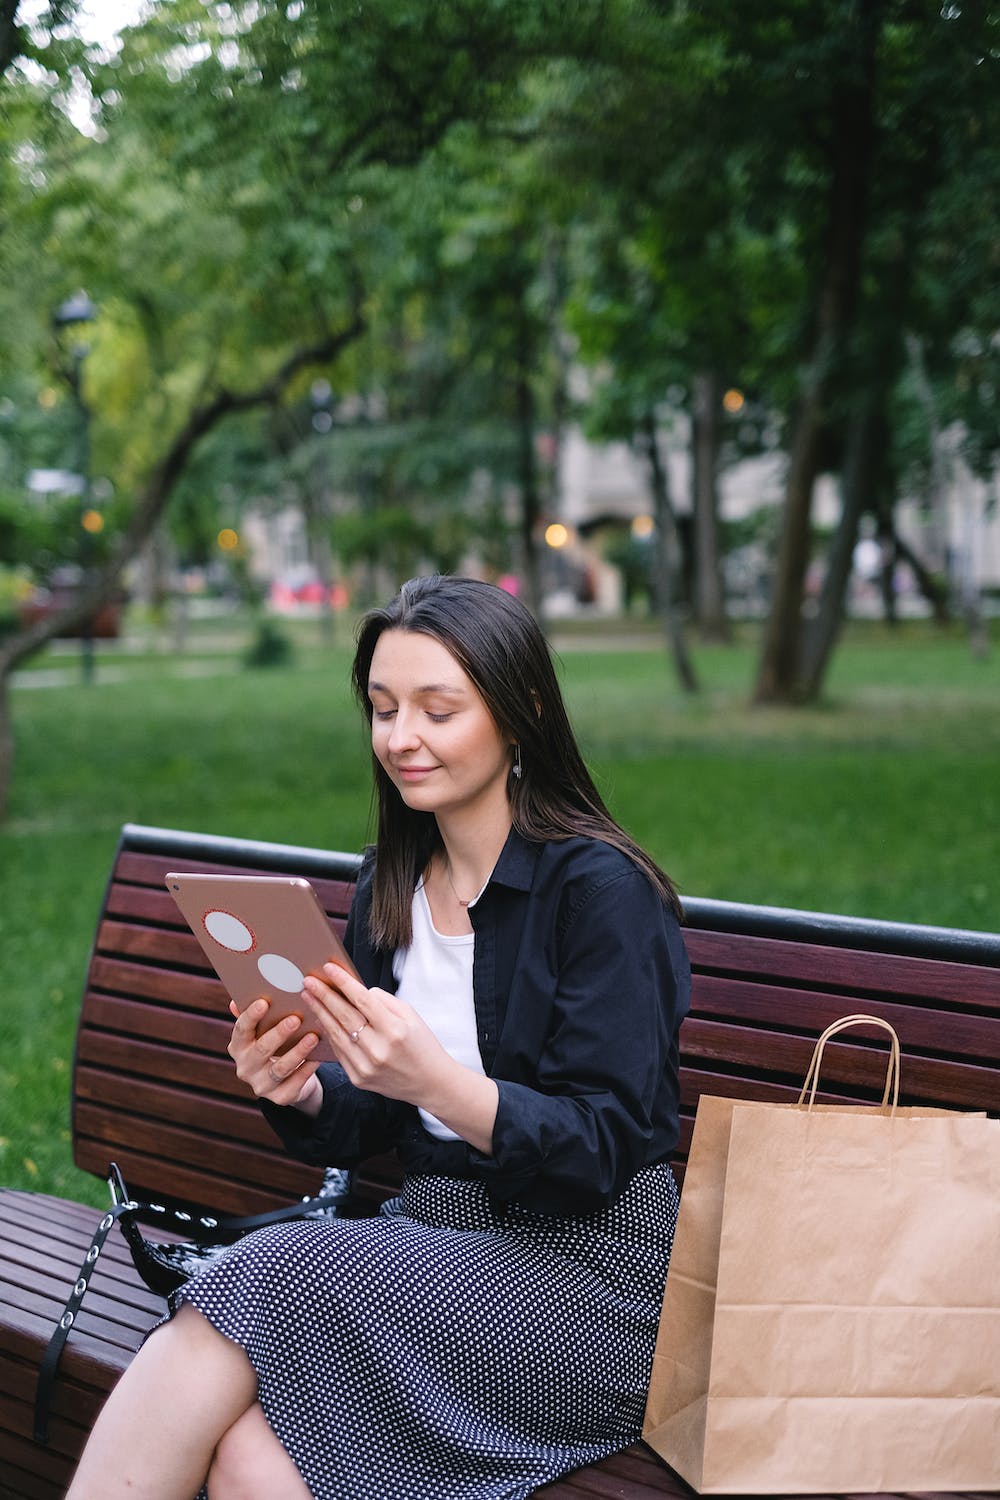 woman-in-black-long-sleeve-shirt-sitting-on-a-bench-using-a-digital-tablet- your online audience